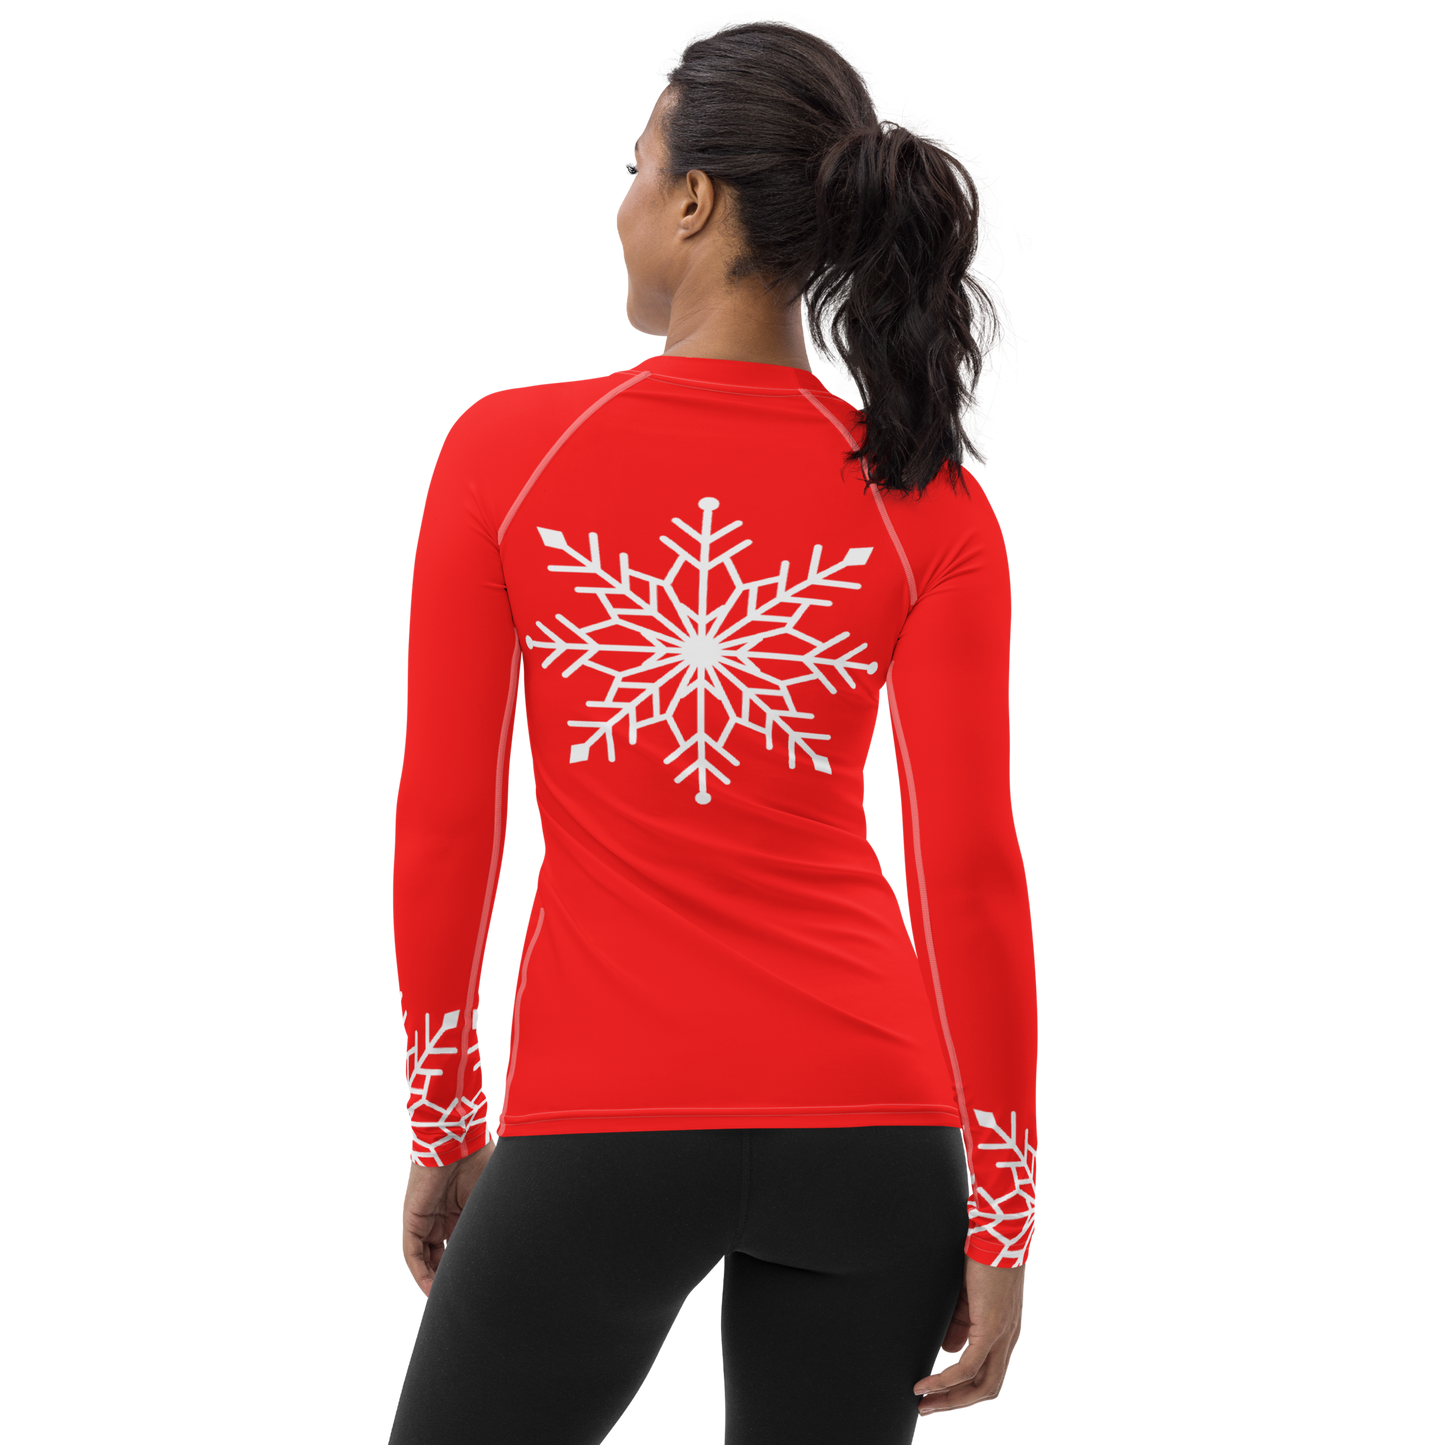 Winter Snowflake Top, White Snowflake on Bright Red Women's Rash Guard, Holiday Top